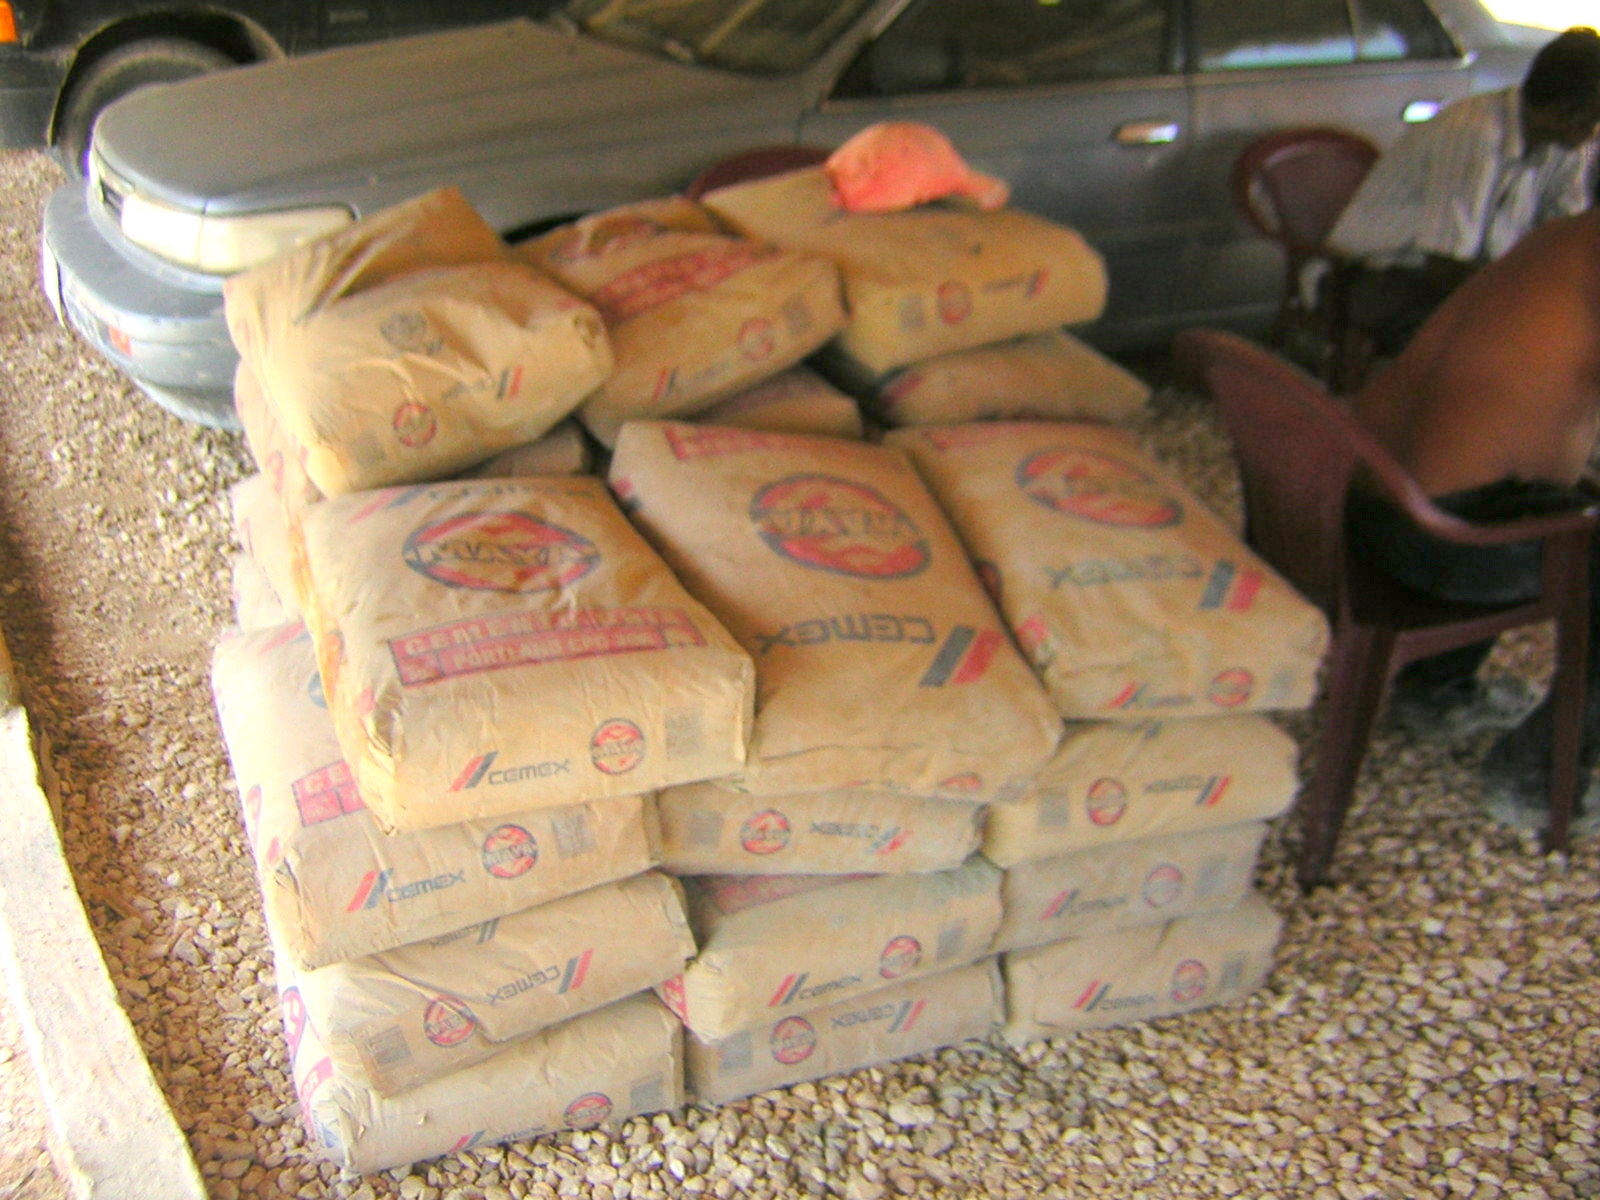 [Bags+of+Cement+Ready+to+Mix+9-11-2008+11-48-45+AM.JPG]